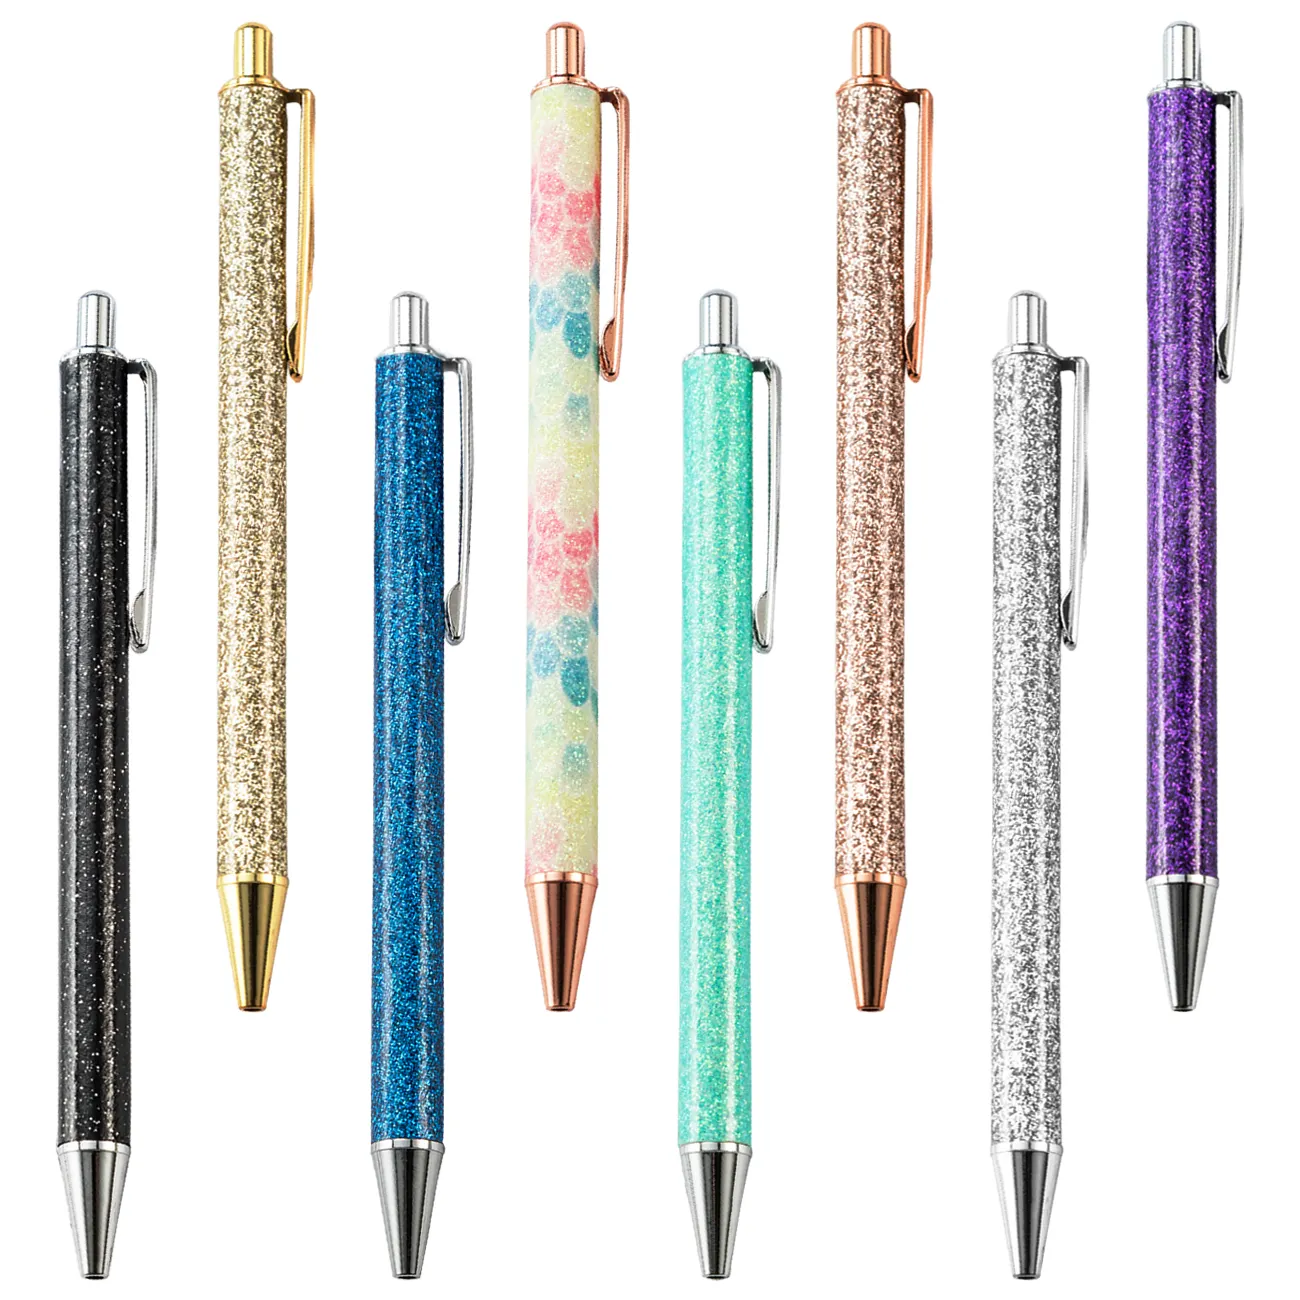 Ballpoint Pens Metal Retractable fansy pink Pen Black Ink Glitter Rose Gold Click custom cute Pens with logo for School boligraf